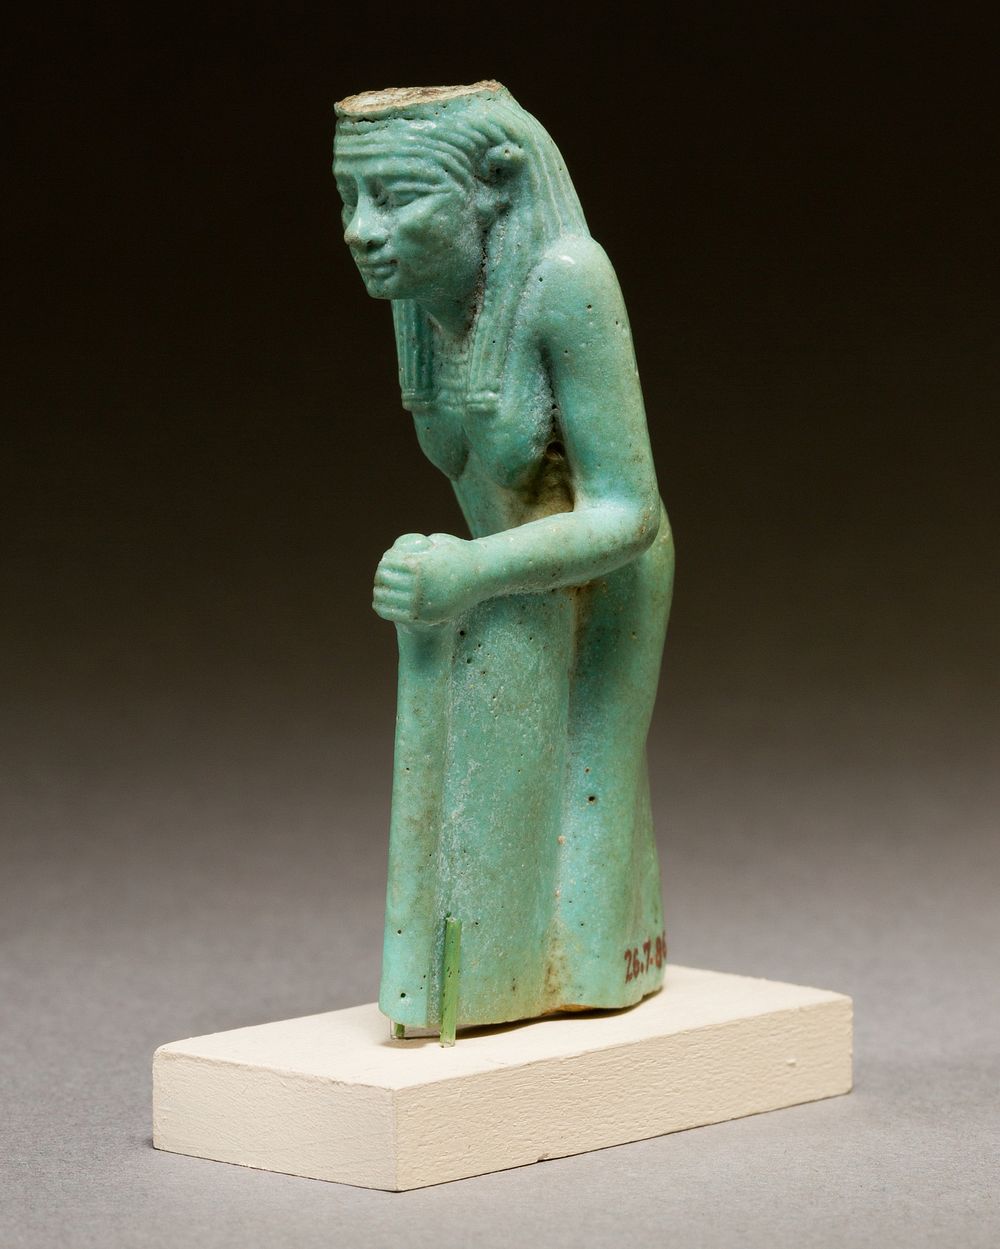 Statuette of a worn or aged woman, probably a goddess